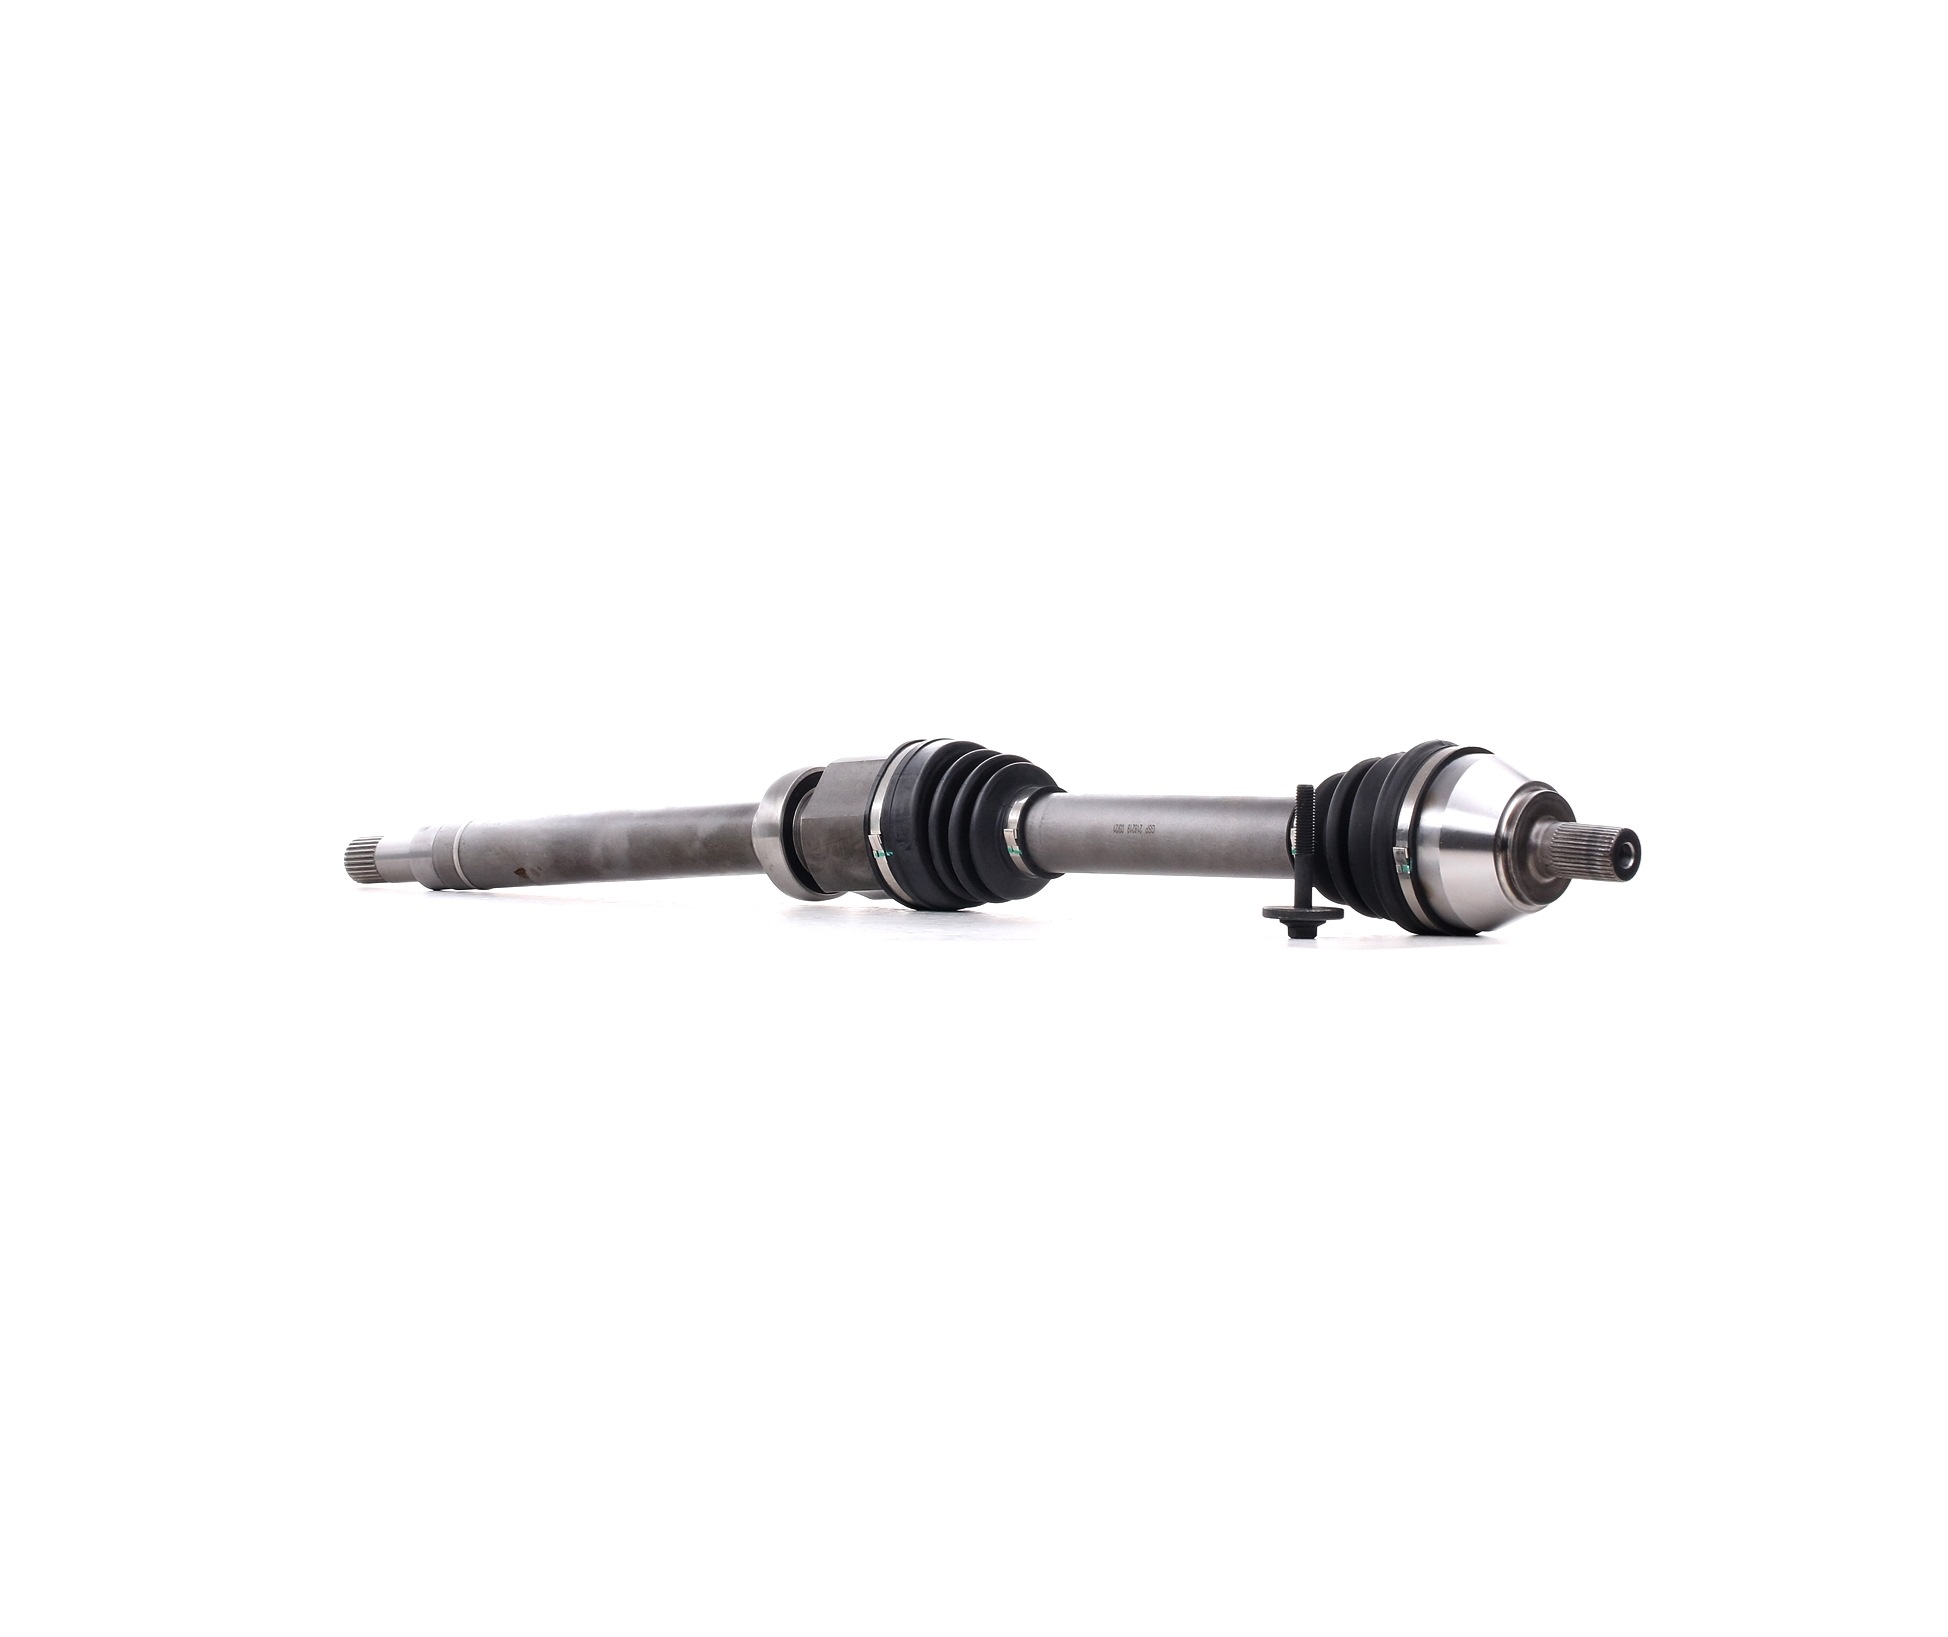 Image of GSP Drive shaft FORD,VOLVO 218219 1223723,1223725,1223726 CV axle,Half shaft,Driveshaft,Axle shaft,CV shaft,Drive axle 1302701,1302702,1305325,1305326